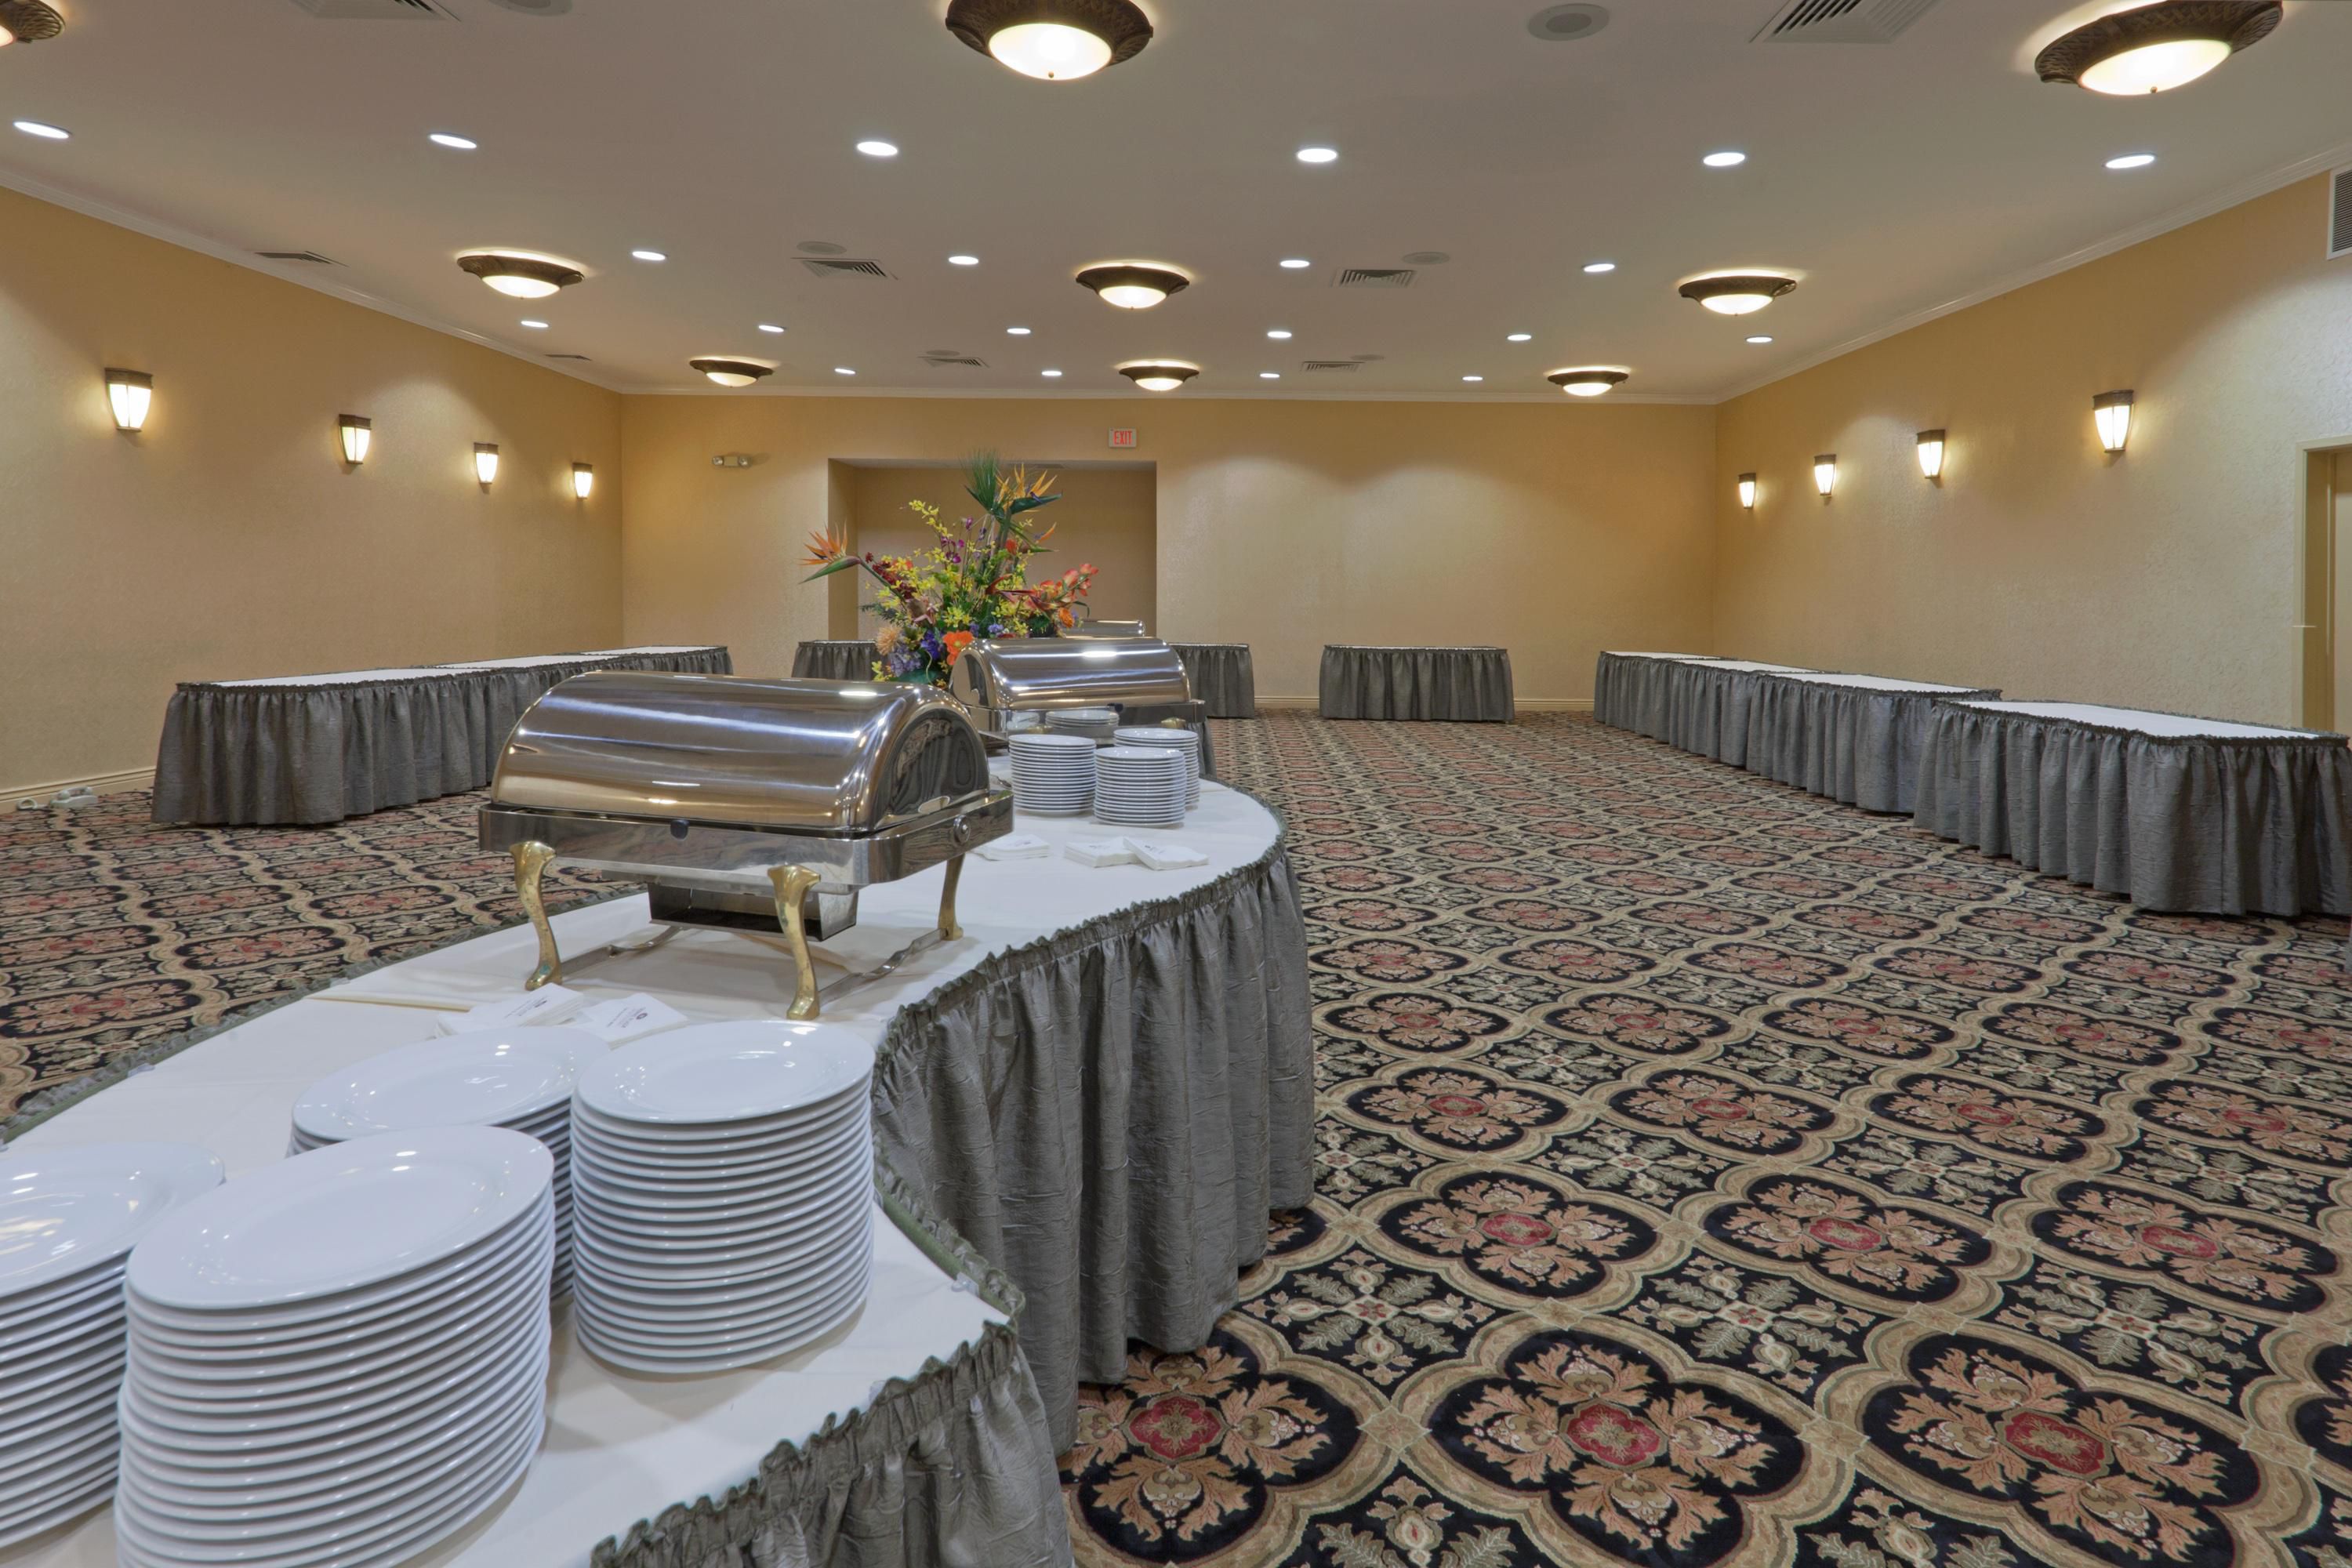 Our Lahaina Bay room is perfect for social events